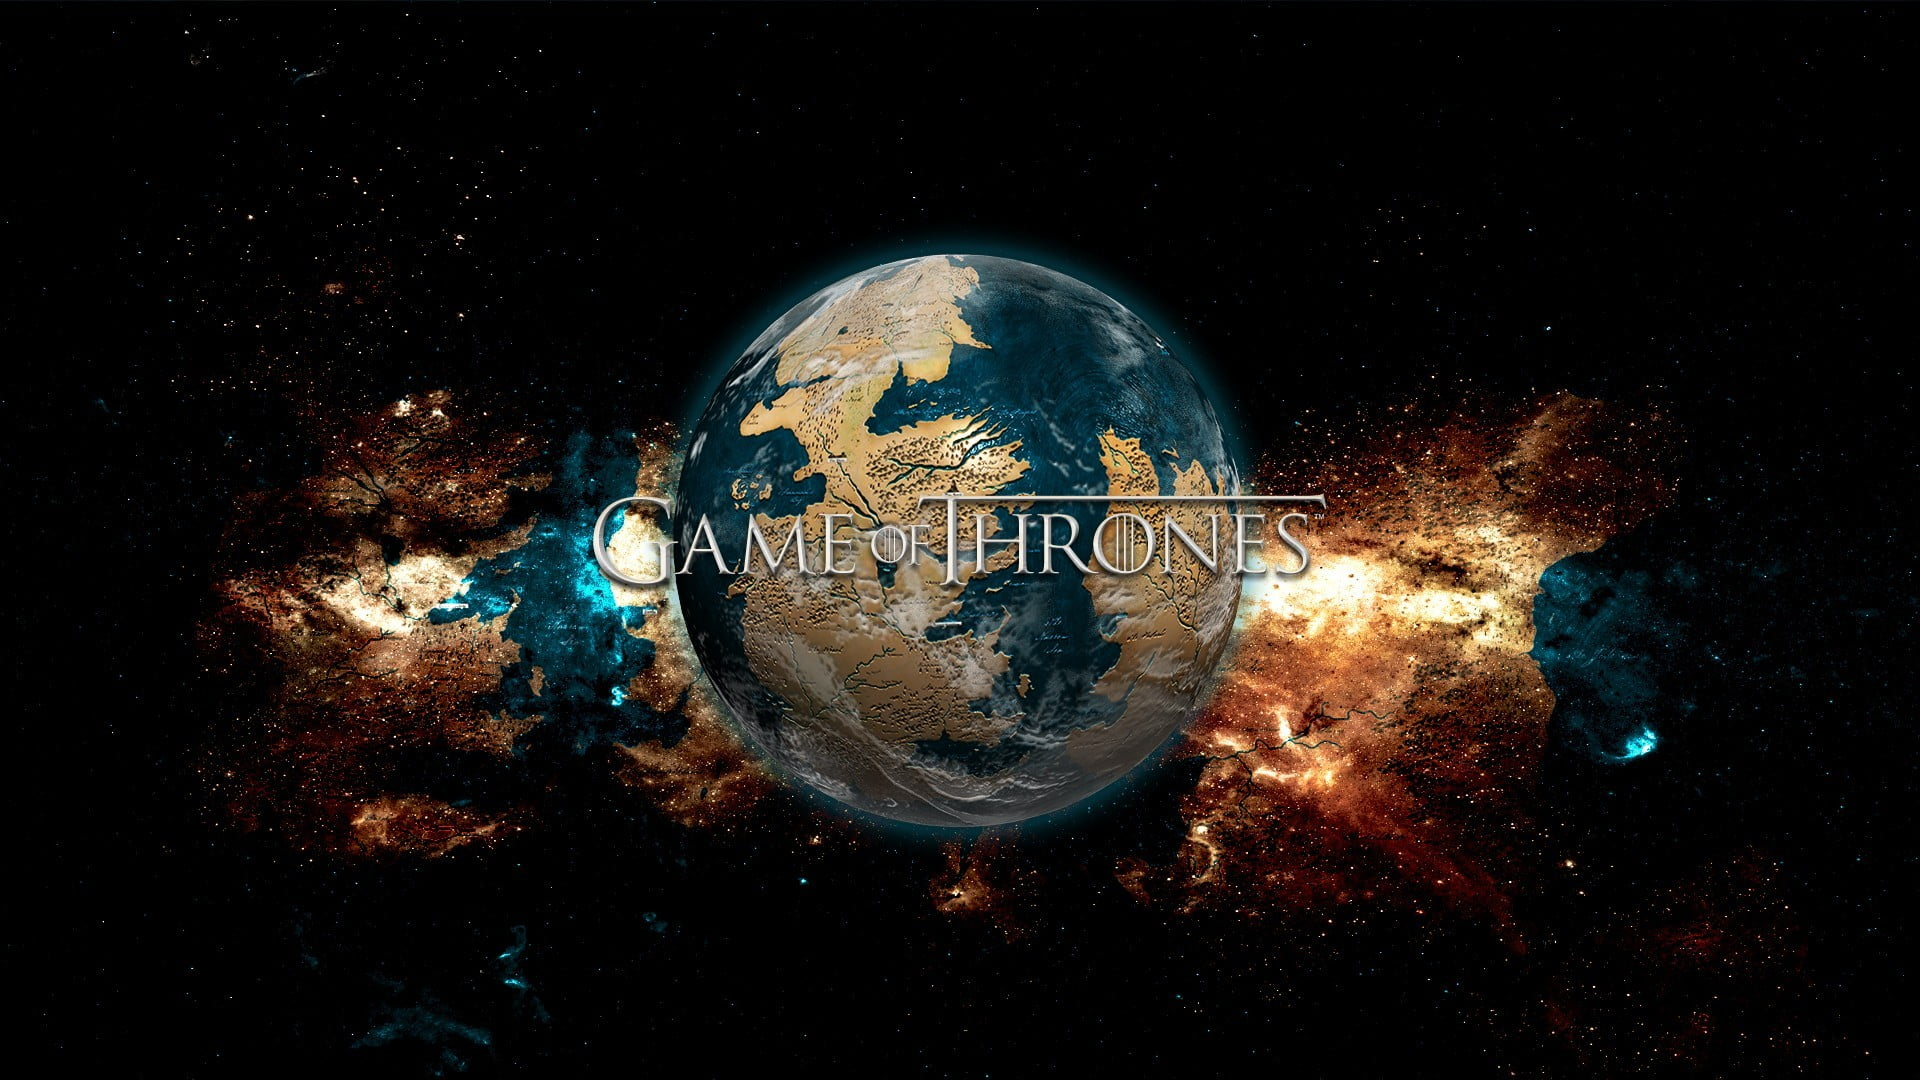 1920x1080 Game of Thrones 3D wallpaper, Game of Thrones, Westeros, stars, space art HD wallpaper